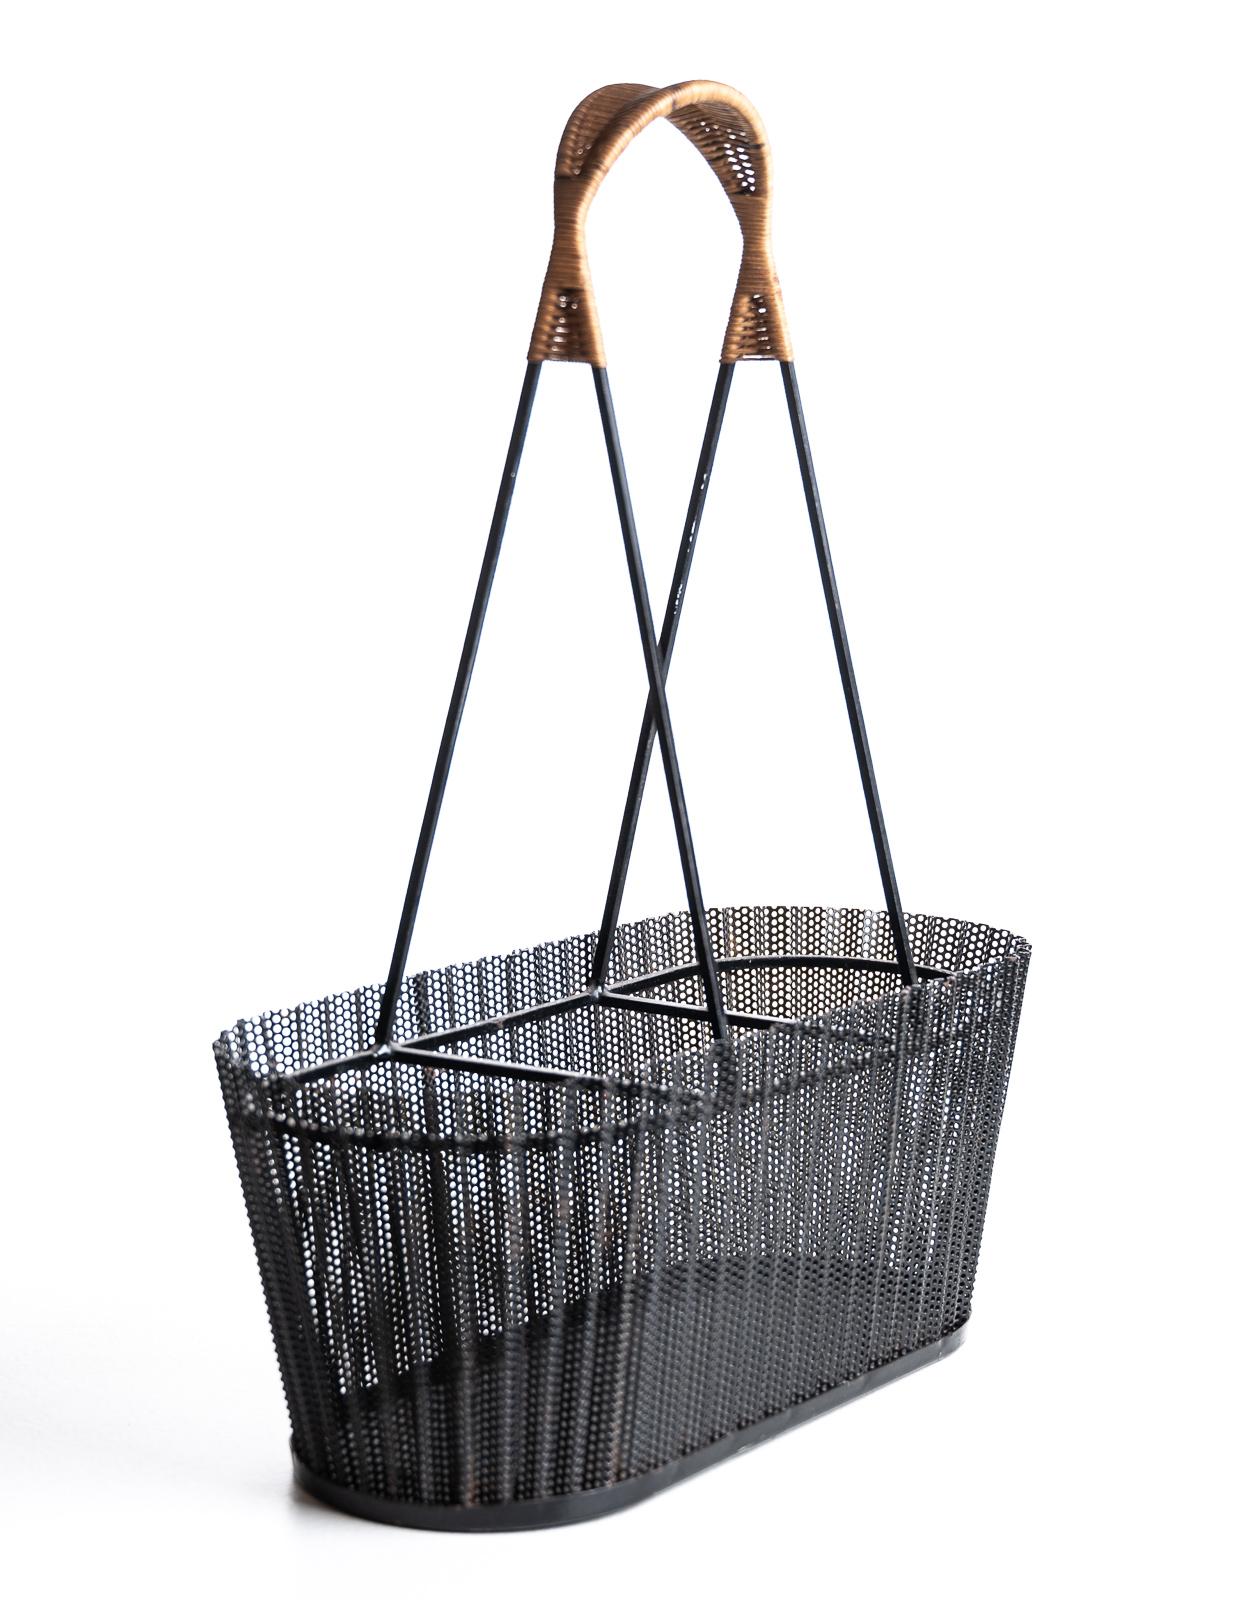 French Rare Metal Basket with Wicker Handles by Mathieu Matégot